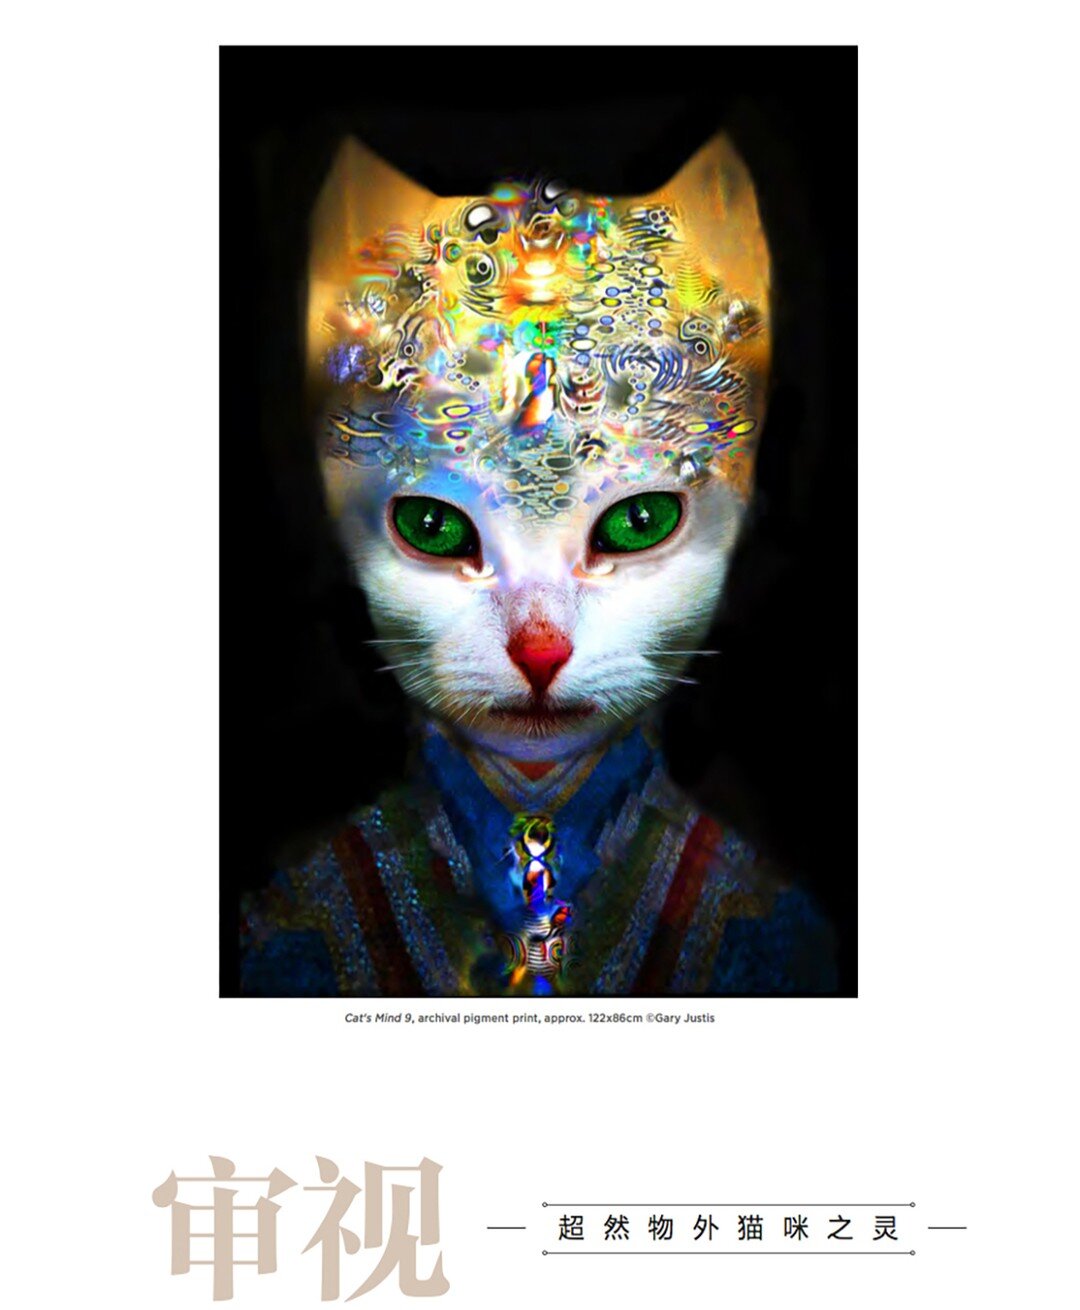 I'm honored to have my work included in one of China's leading photography magazines, 𝙋𝙝𝙤𝙩𝙤𝙜𝙧𝙖𝙥𝙝𝙚𝙧'𝙨 𝘾𝙤𝙢𝙥𝙖𝙣𝙞𝙤𝙣. The issue features images of cats from 13 artists:
The late Harry Whittier Frees 
Gerrard Gethings 
Rhiannon Buckle 